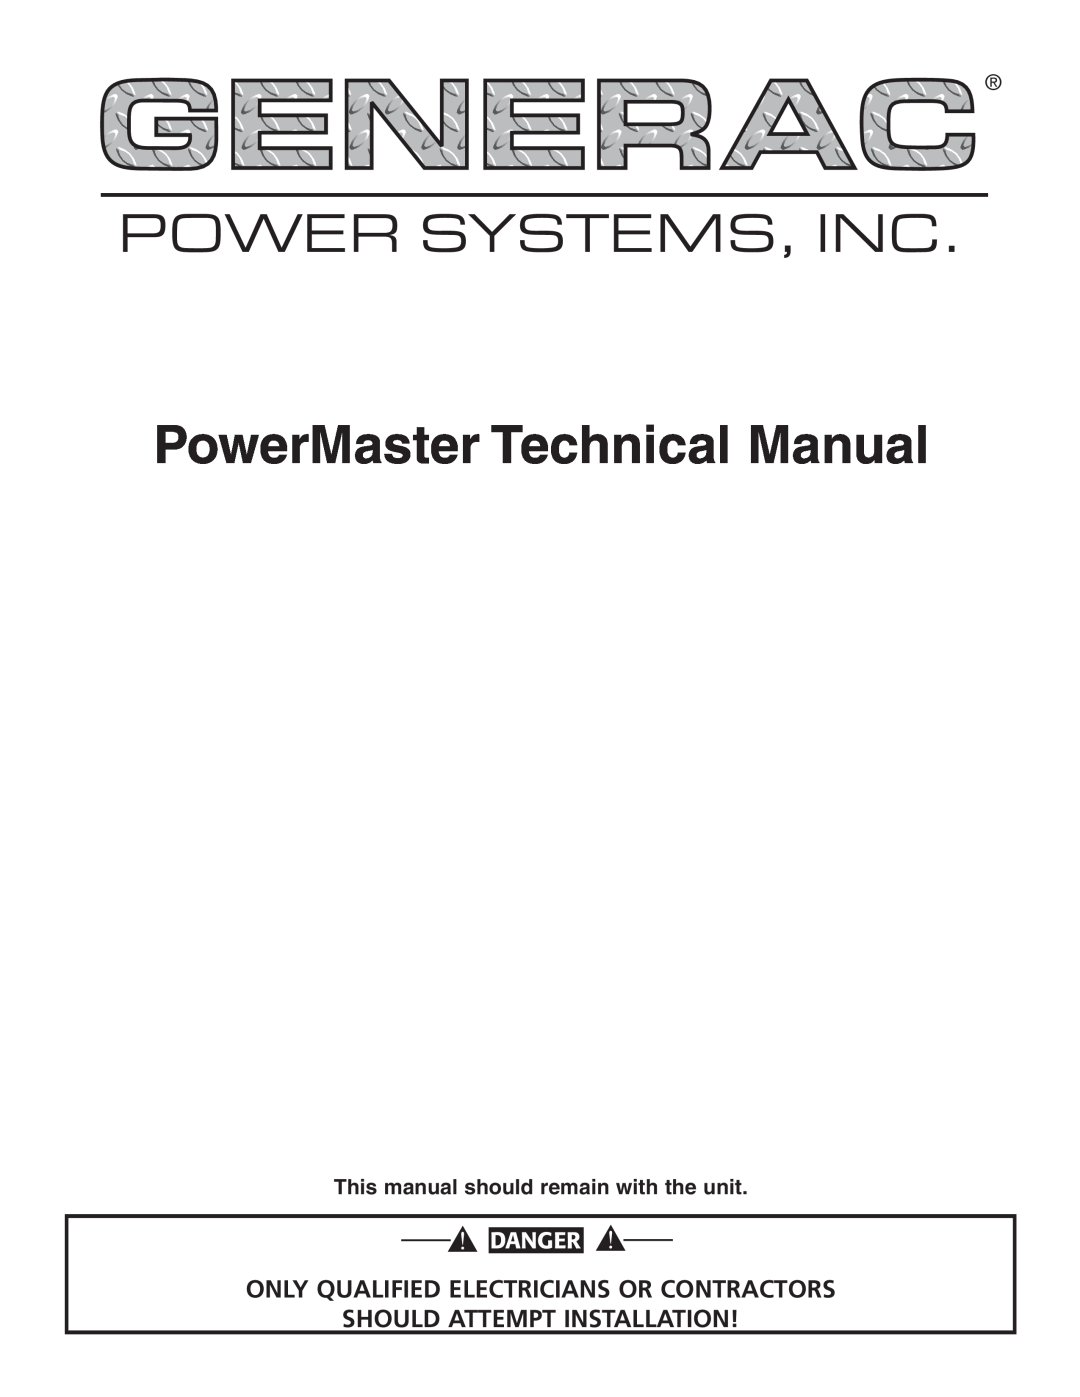 Generac Generator technical manual This manual should remain with the unit, Power Systems, Inc, Danger 